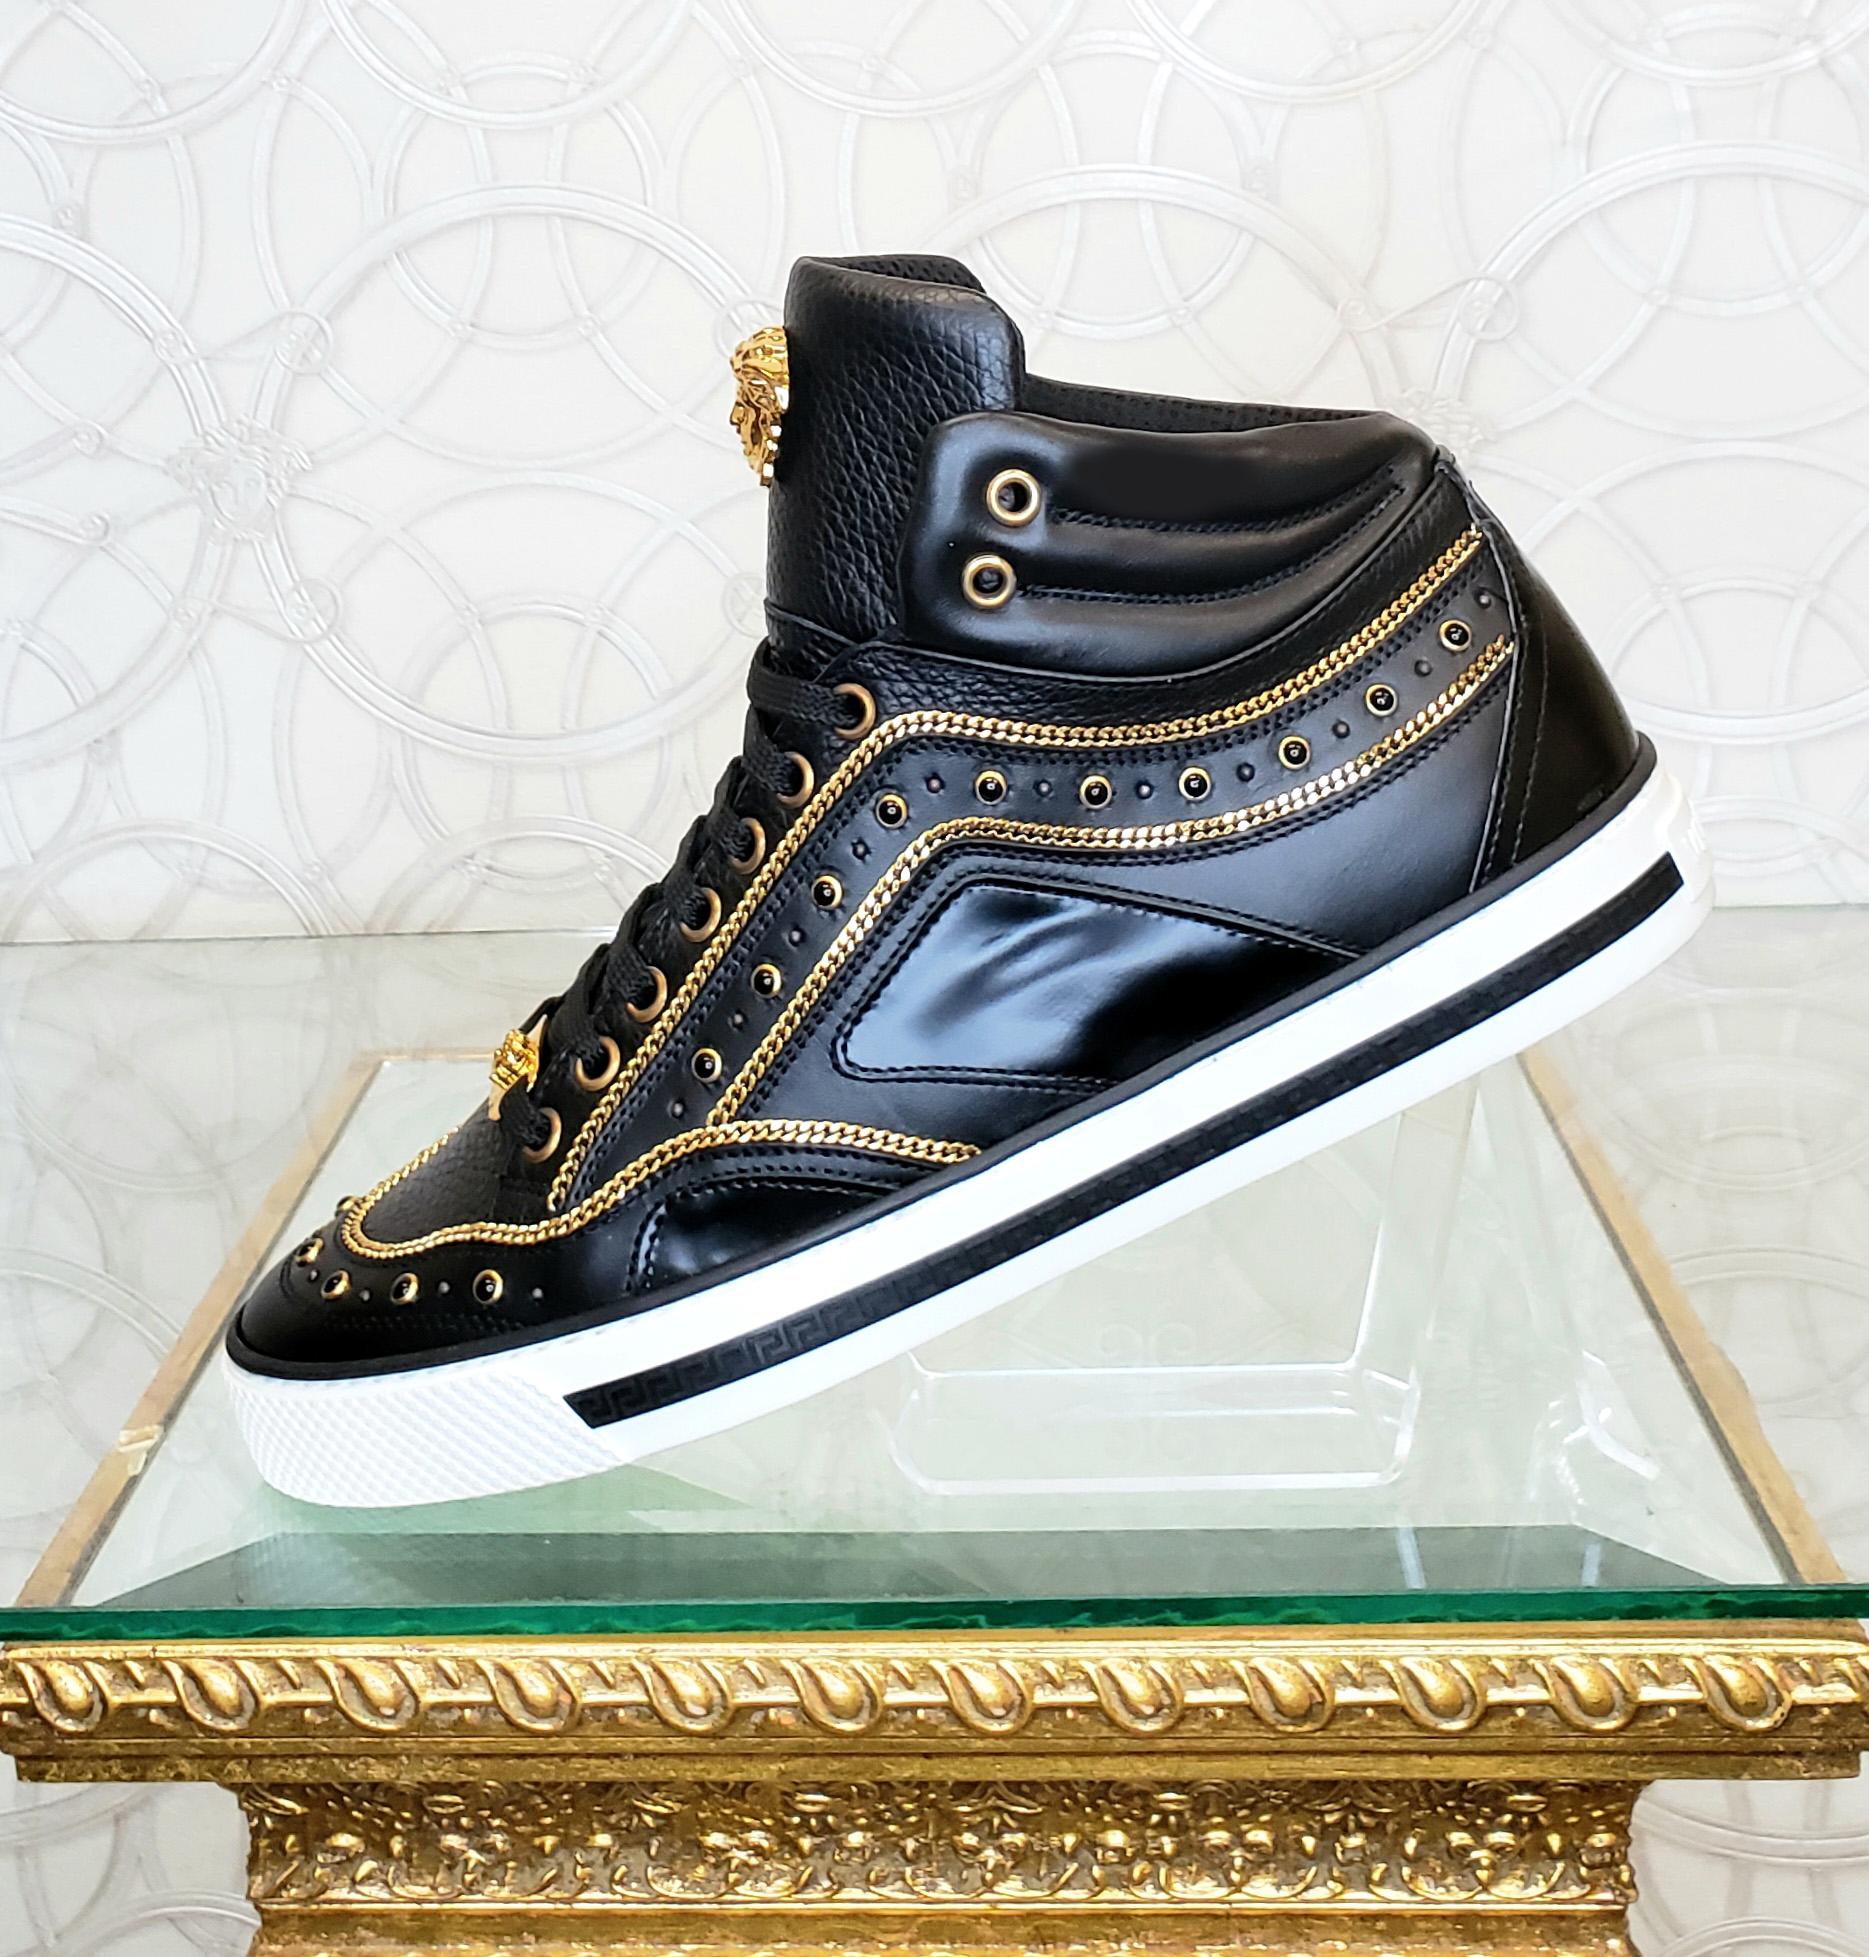 NEW VERSACE STUDDED HIGH-TOP SNEAKERS with GOLD 3D MEDUSA BUCKLE SIZE 39 - 6 1